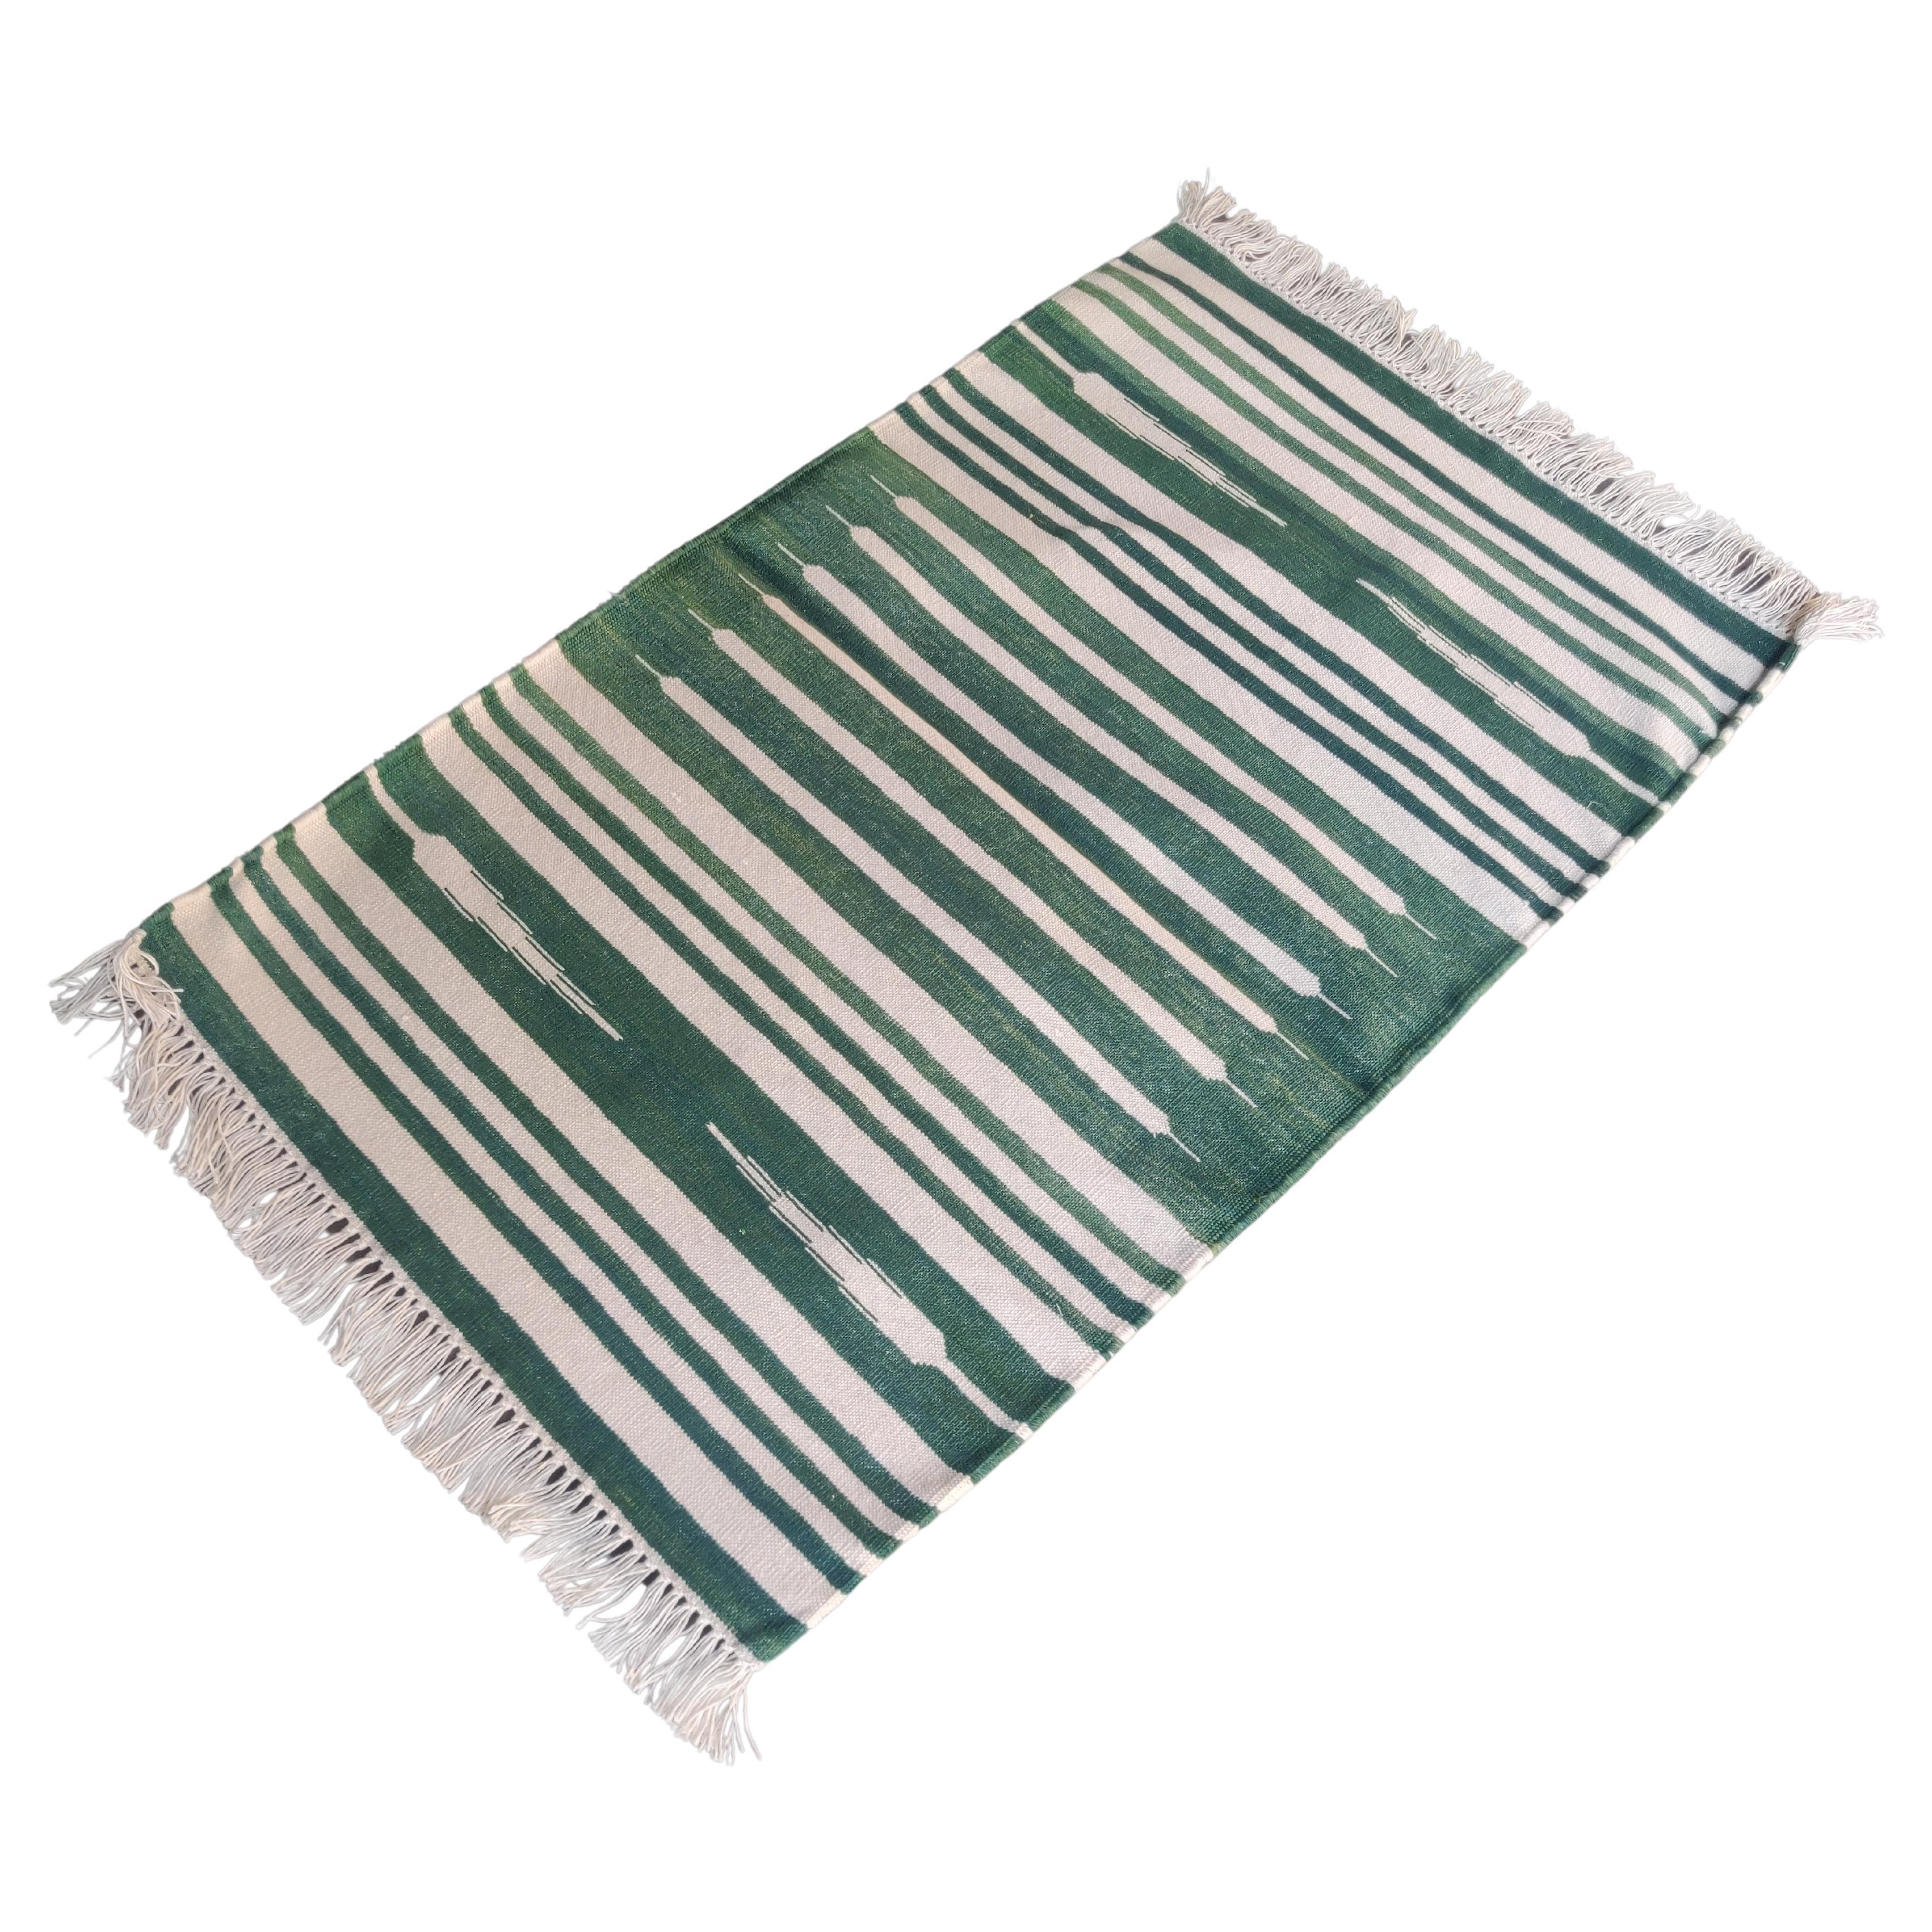 Handmade Cotton Area Flat Weave Rug, 2x3 Green And White Striped Indian Dhurrie For Sale